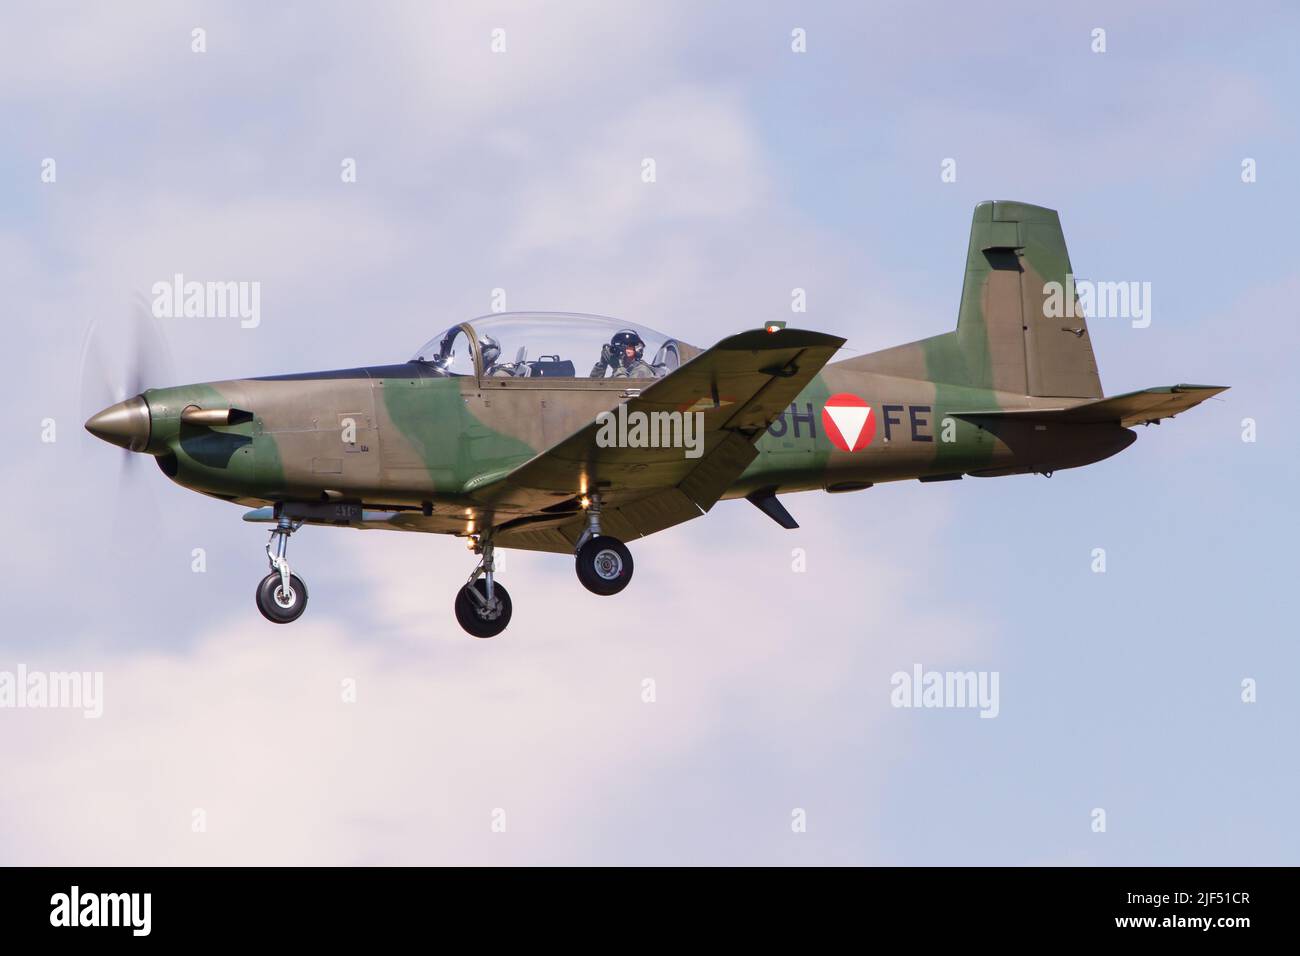 A Pilatus PC-7 training aircraft of the Austrian Air Force coming in for landing in Zeltweg in Austria Stock Photo